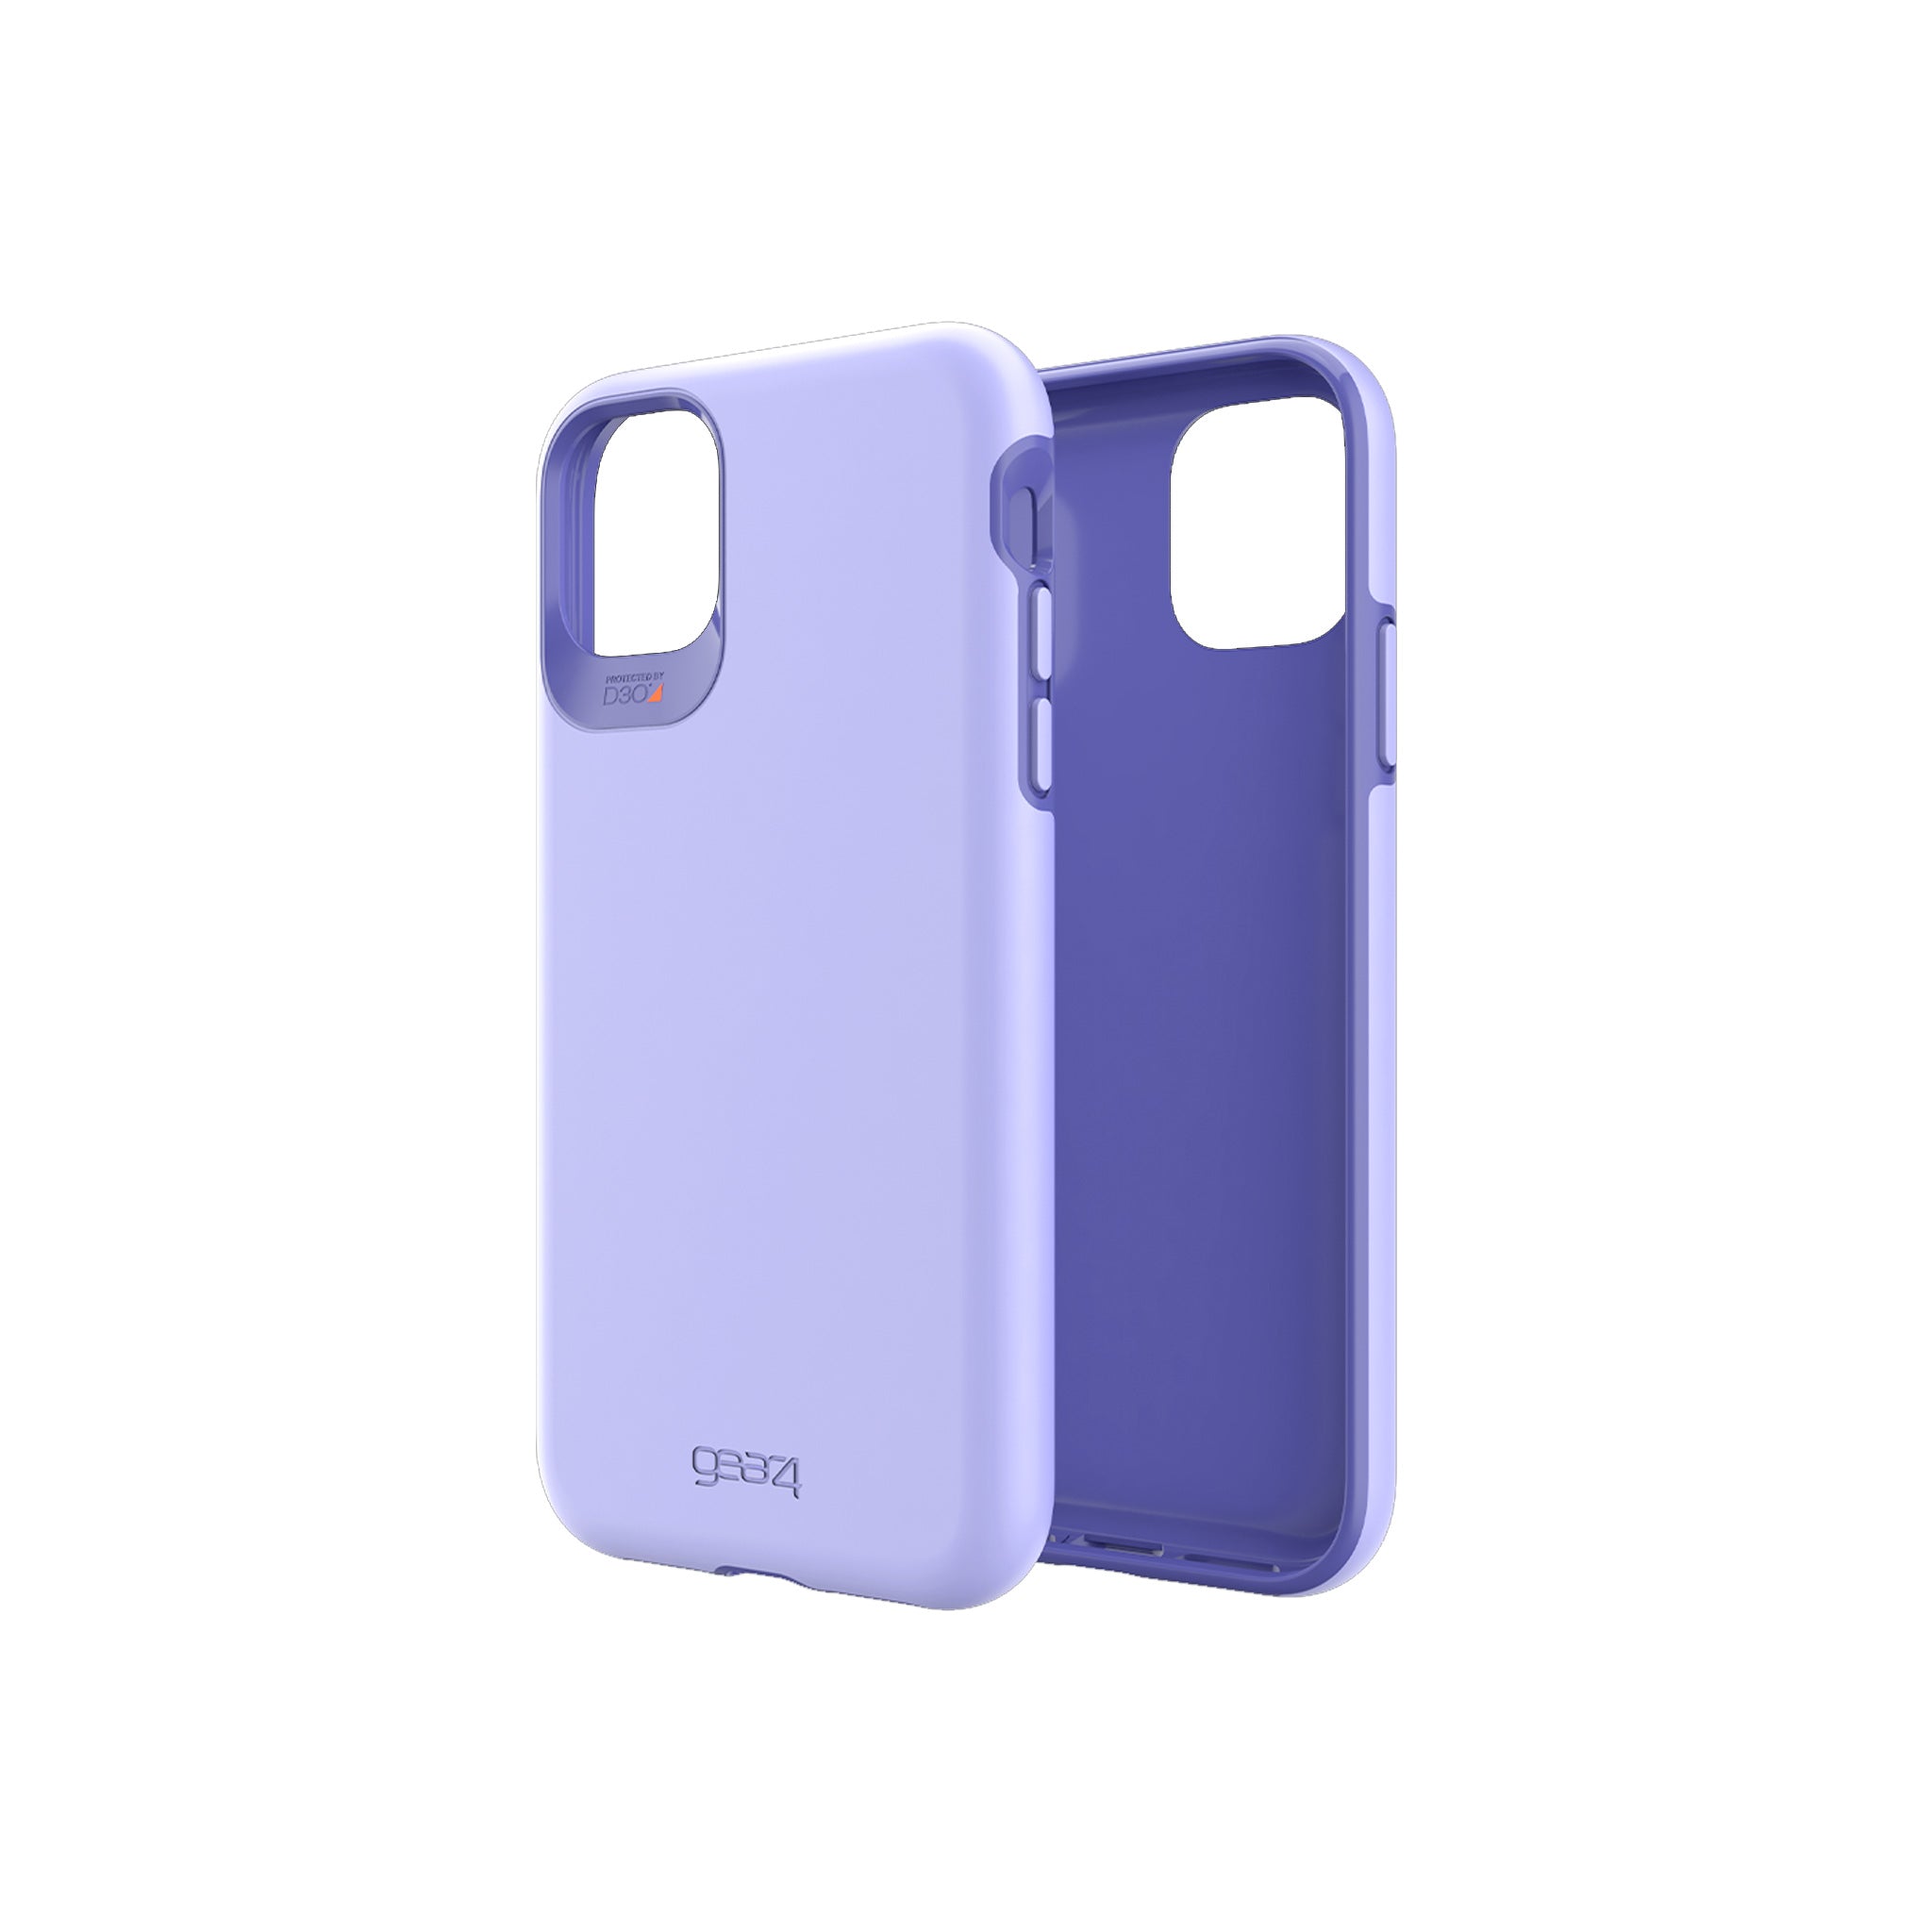 Gear4 - Holborn Case For Apple Iphone 11 - Lilac